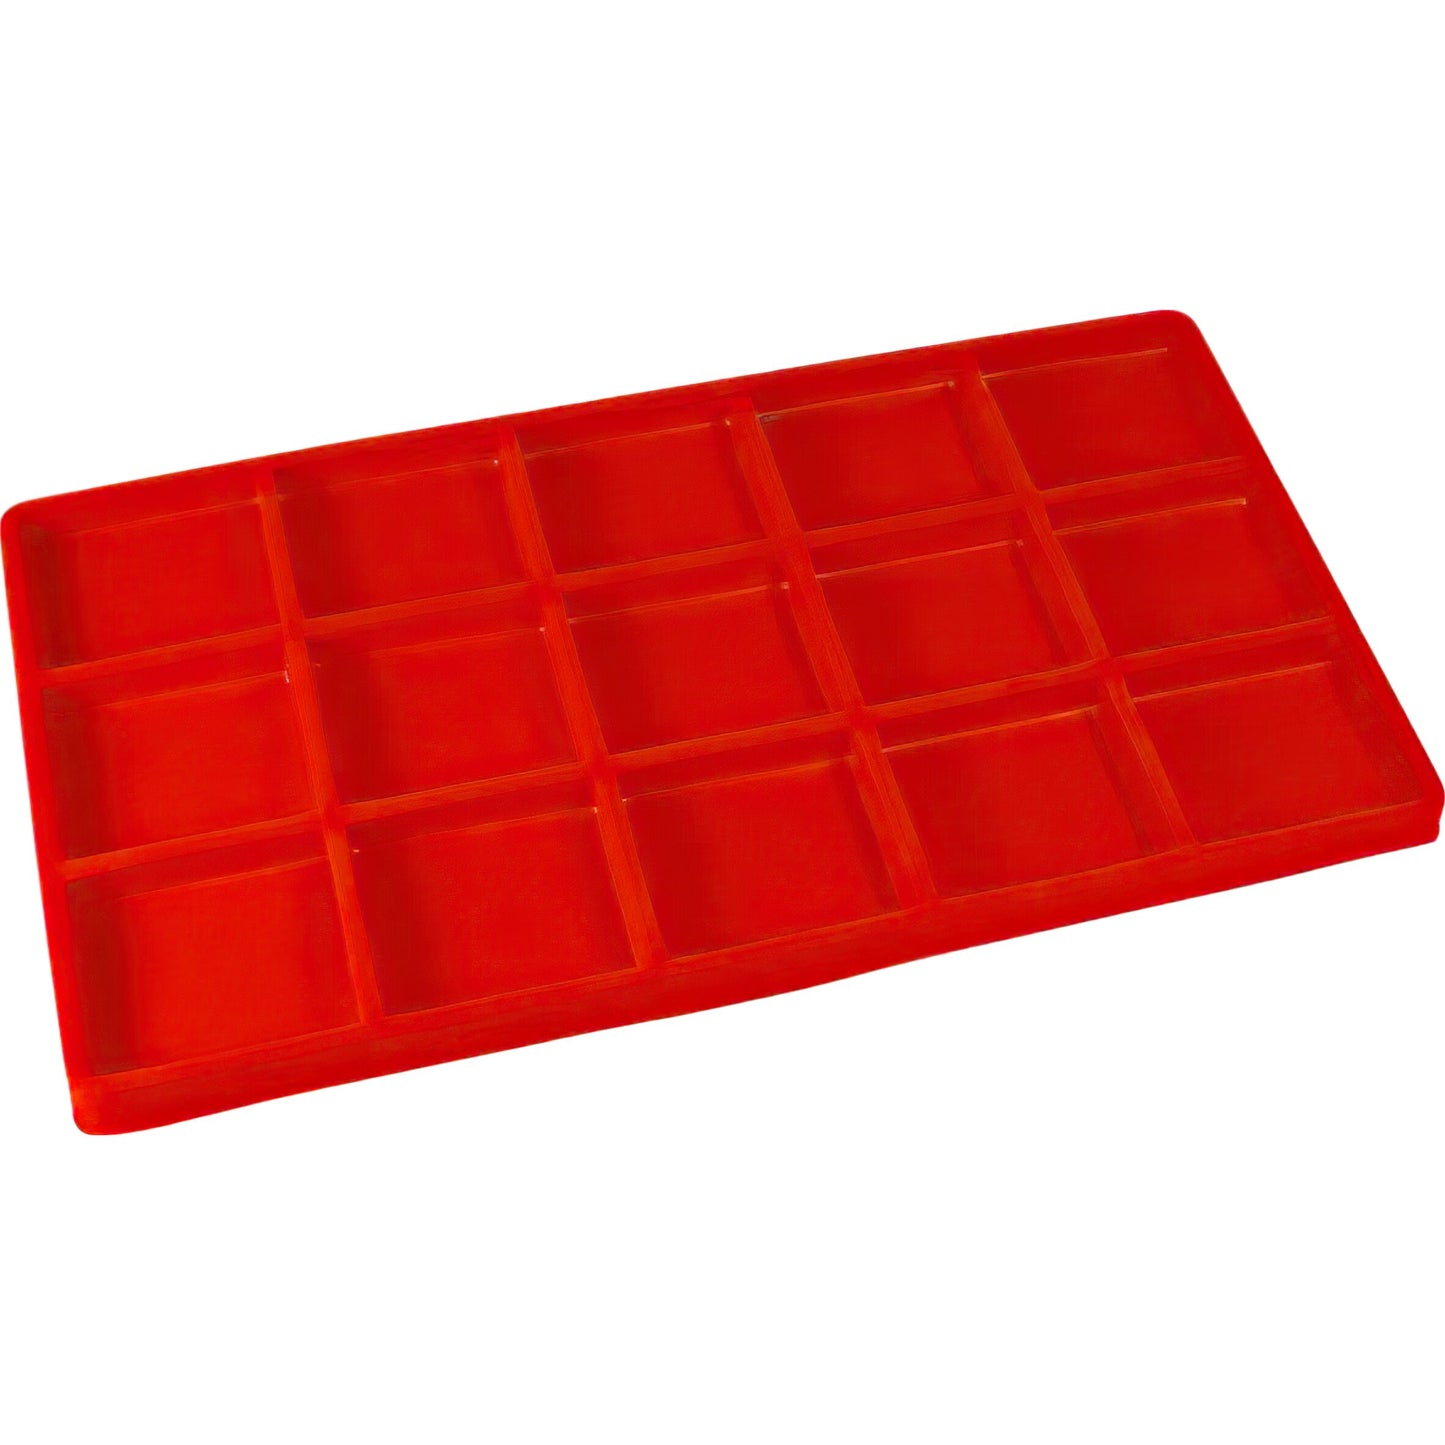 Ten 15 Slot Jewelry Coin Red Showcase Display Tray Inserts